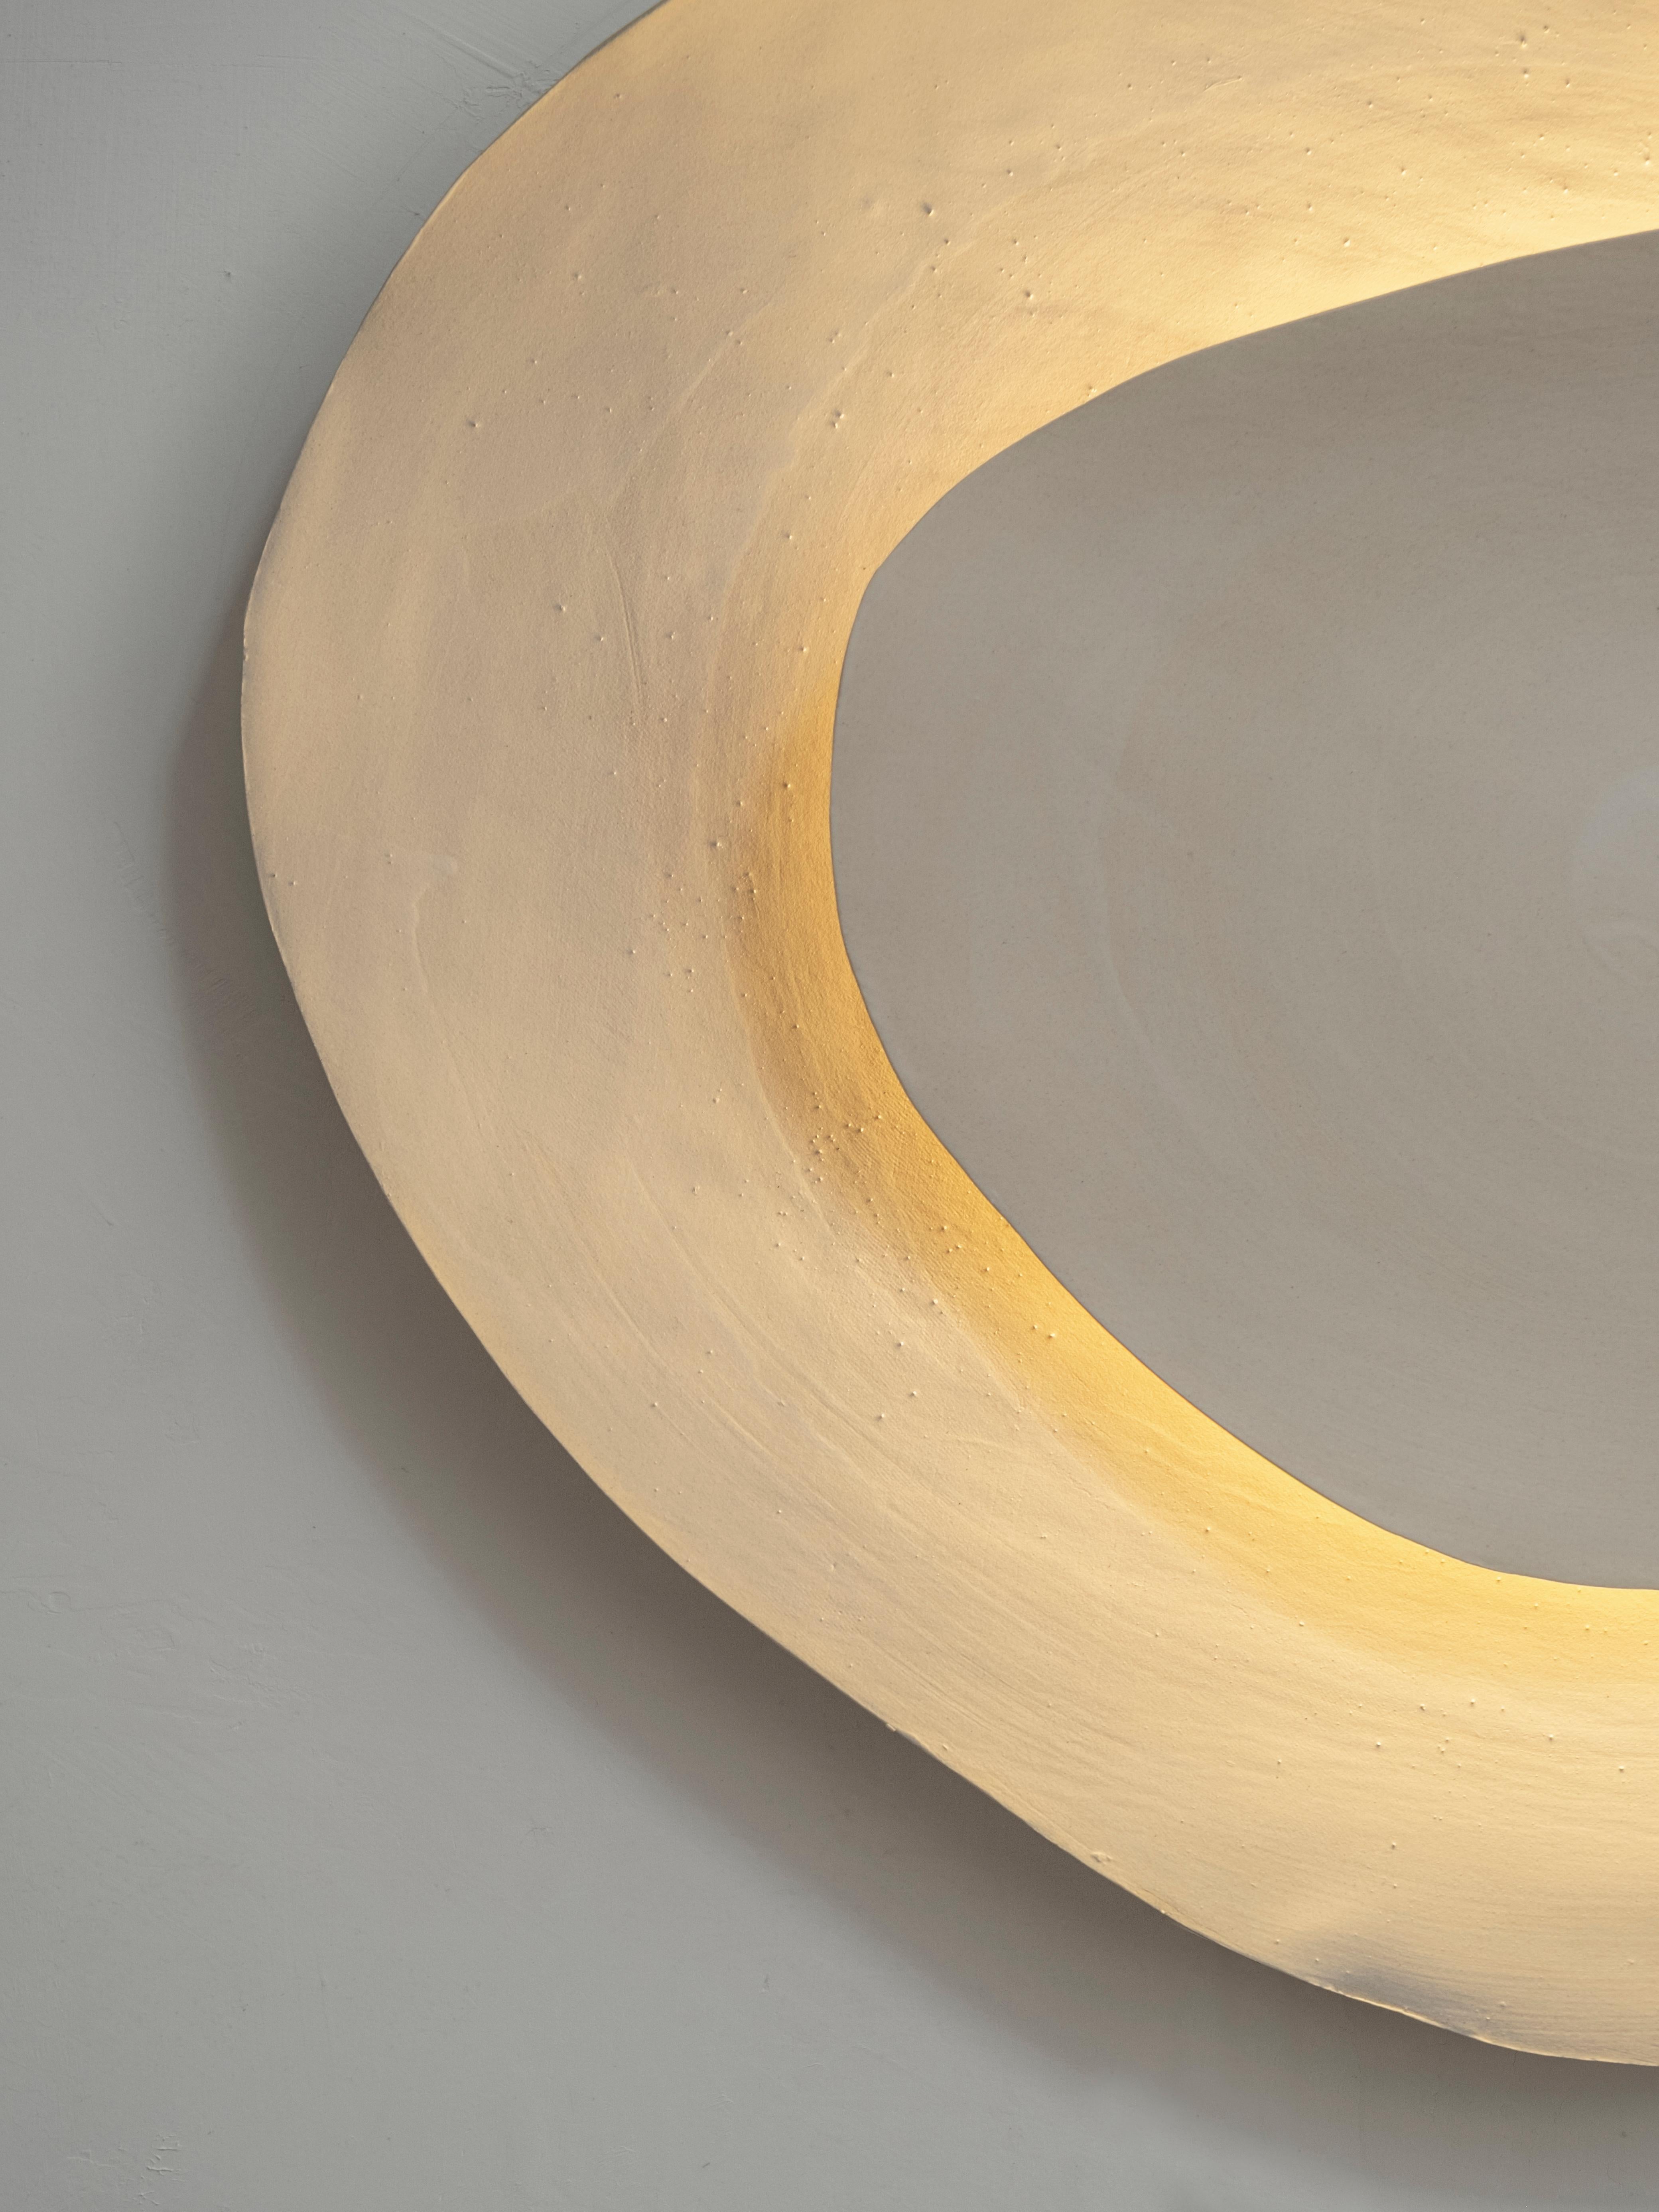 French Silk #12 Wall Light by Margaux Leycuras